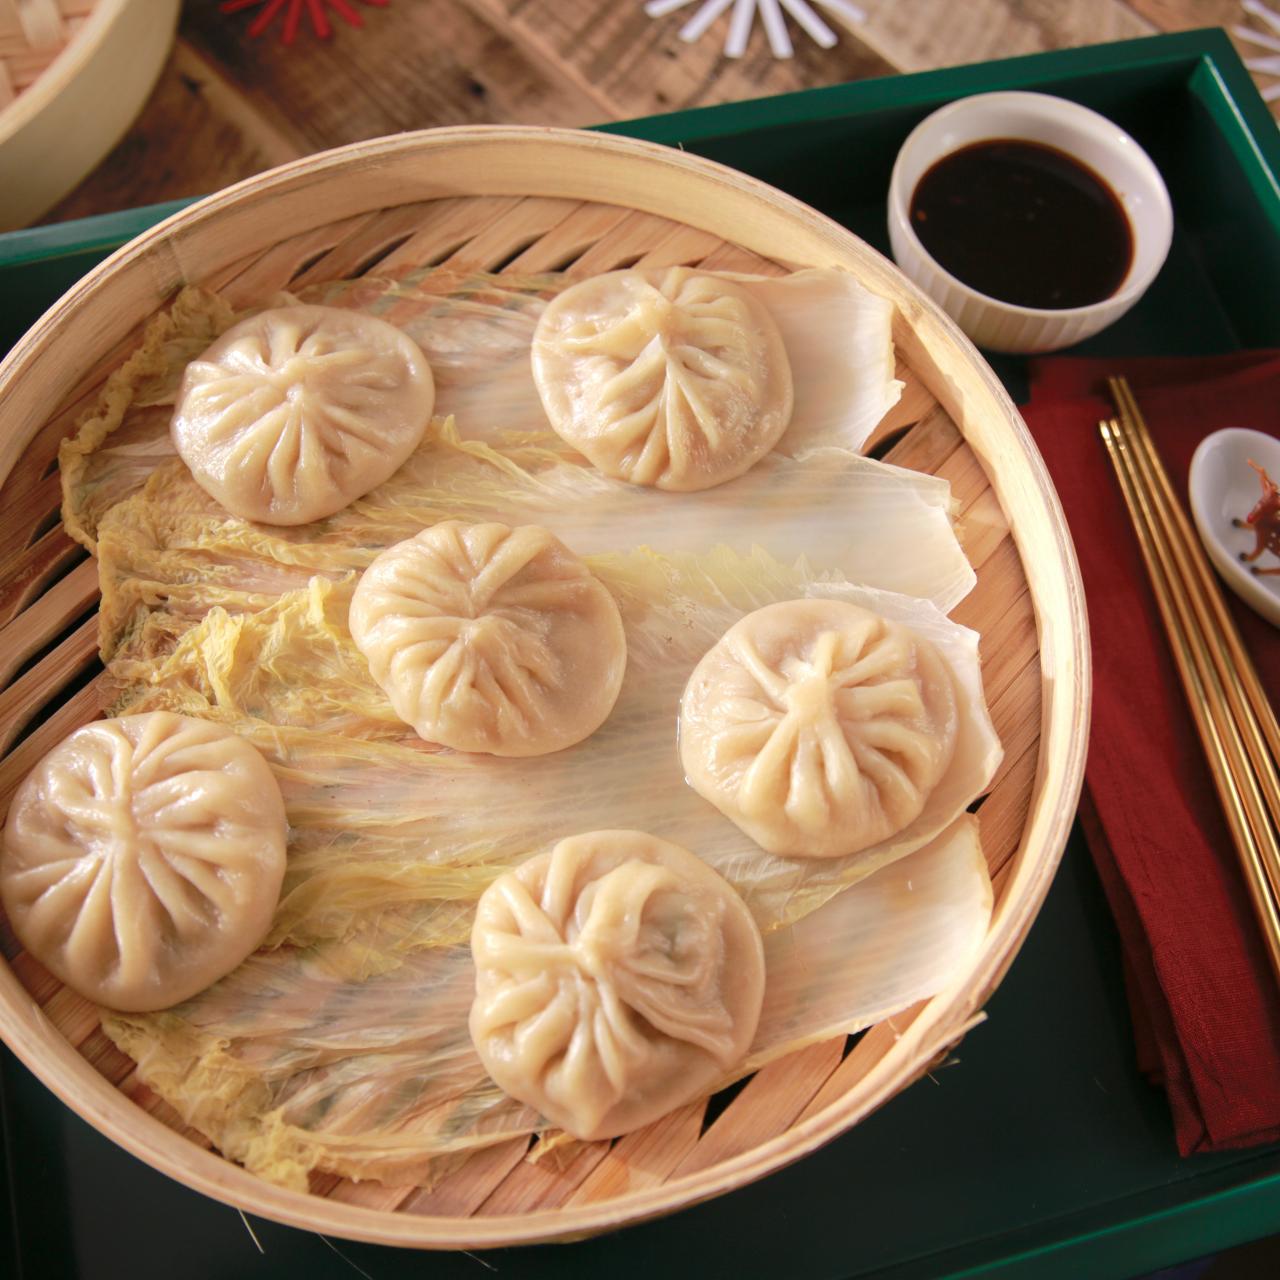 Use a Giant Steamer and Never Make Dumplings in Batches